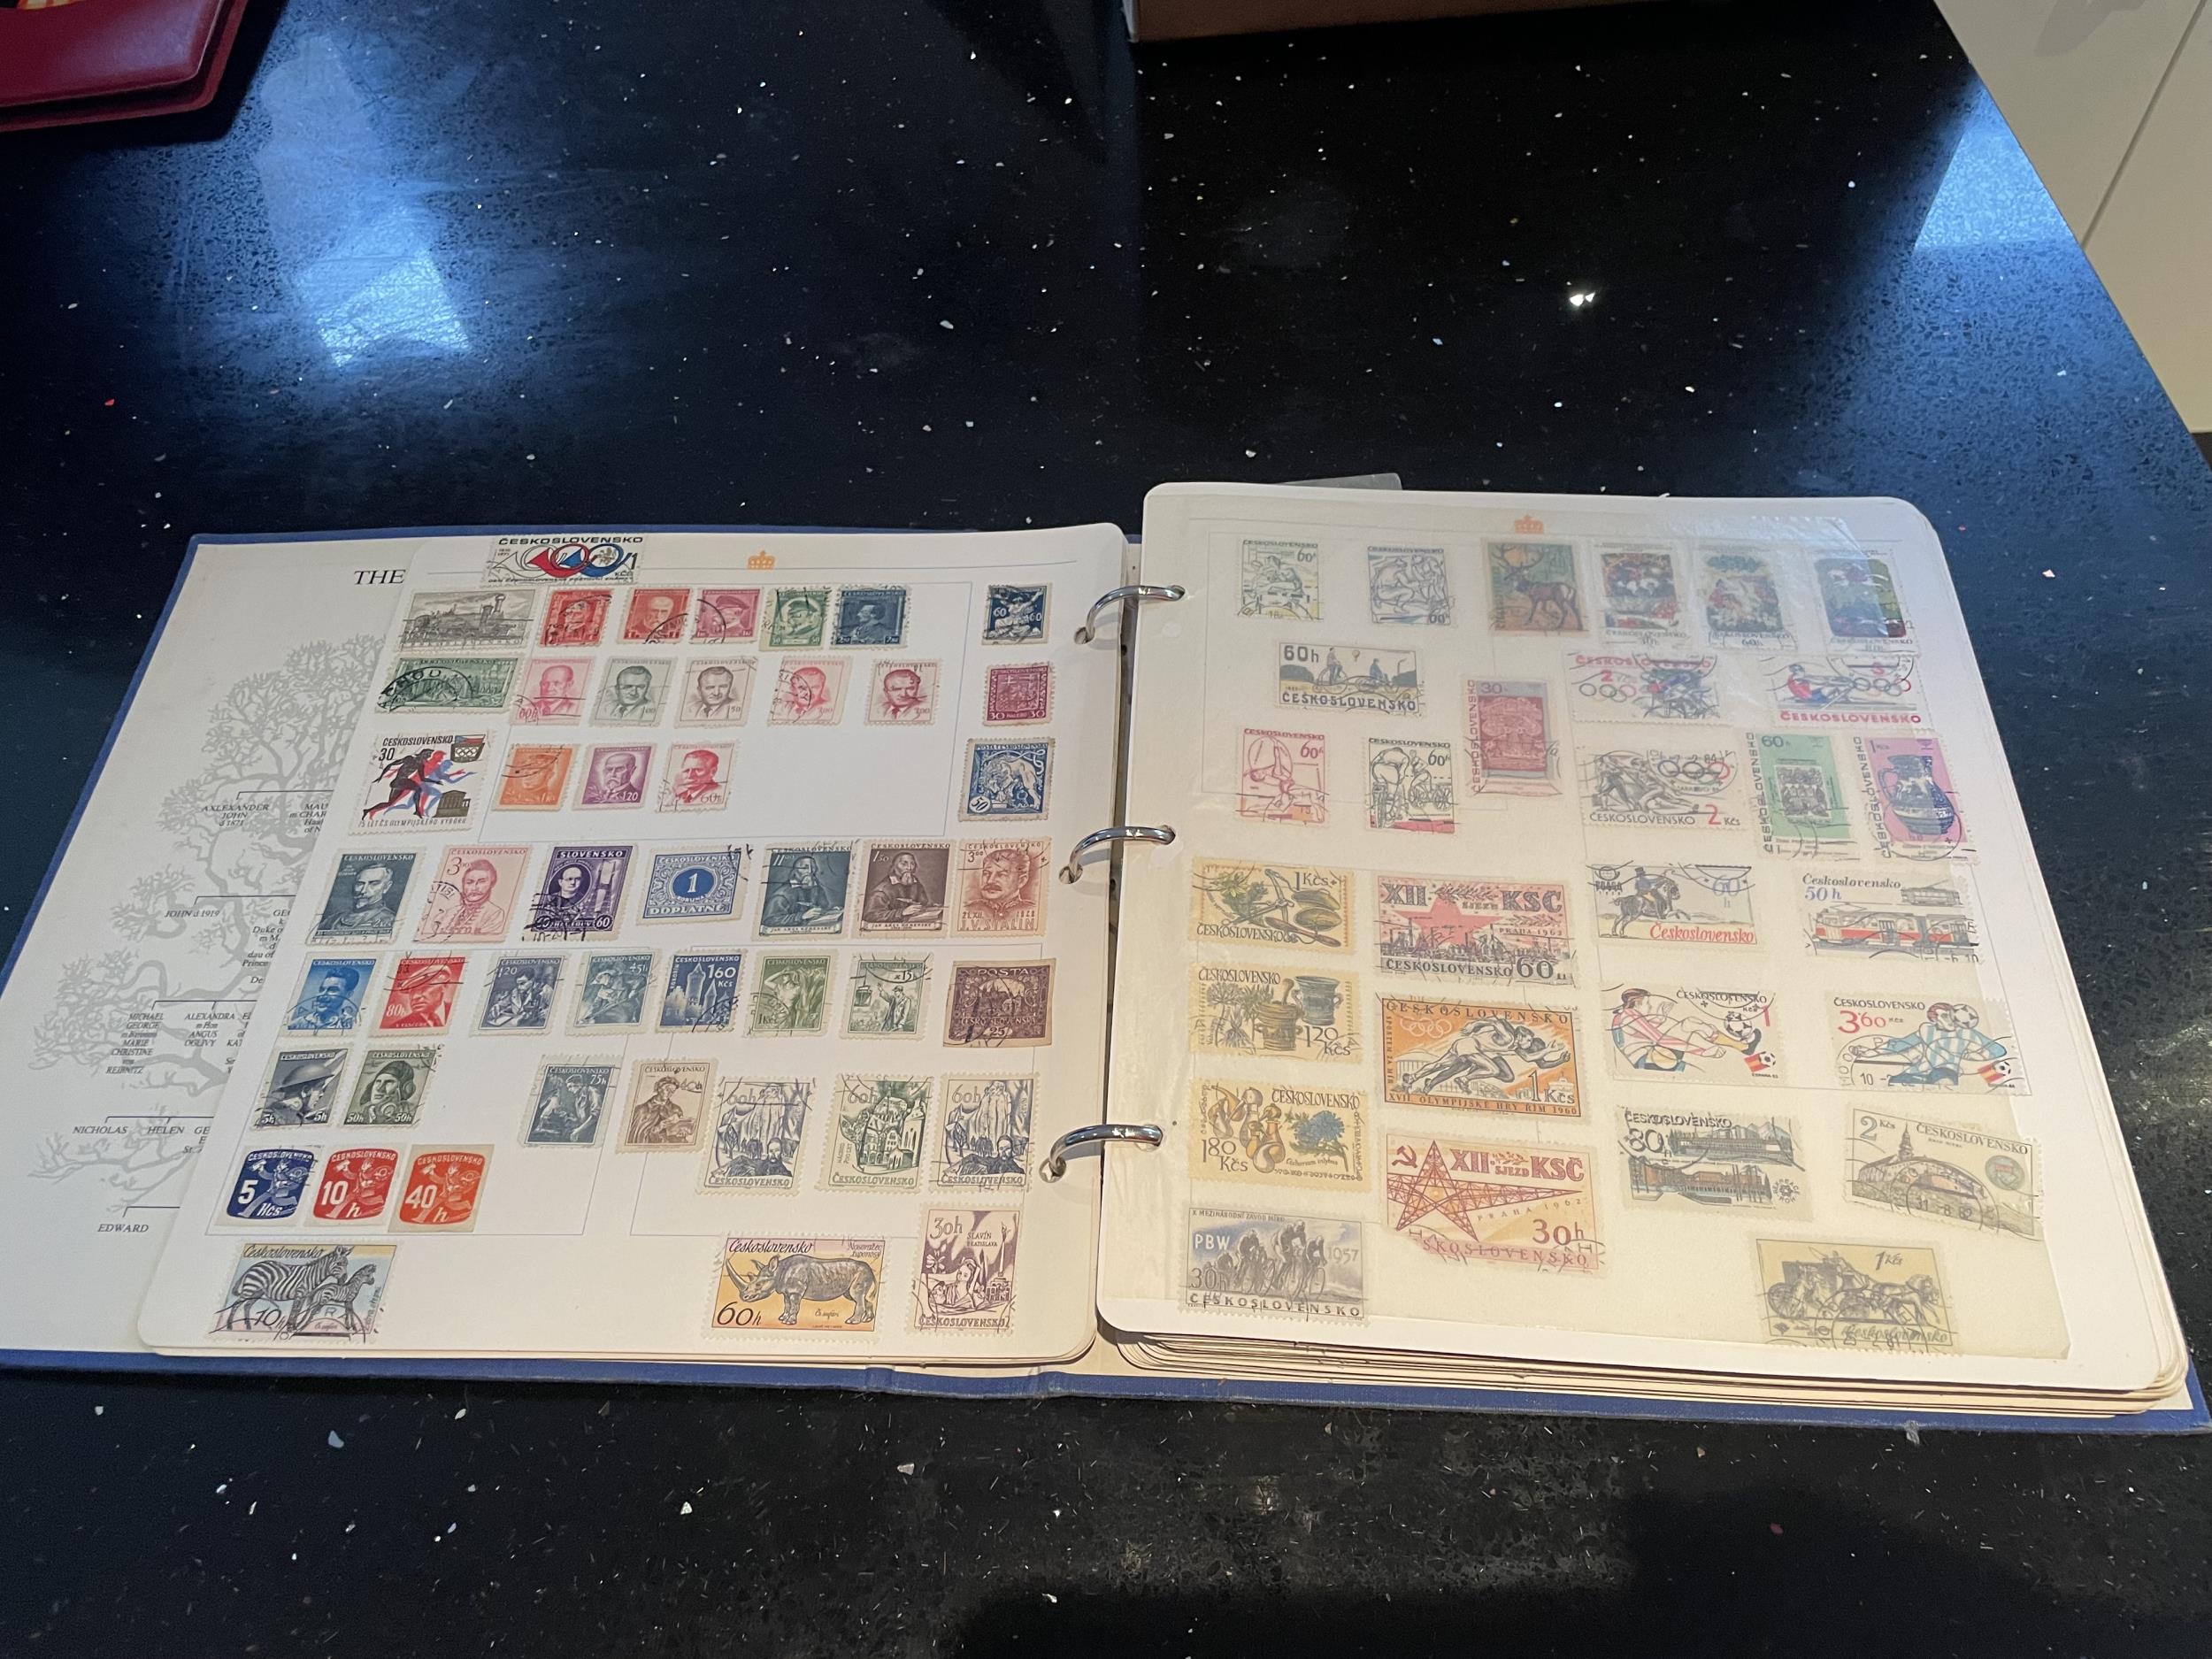 THE ROYAL FAMILY STAMP ALBUM OF WORLD STAMPS - HUNGARY, CUBA, POLAND ETC - Image 4 of 7